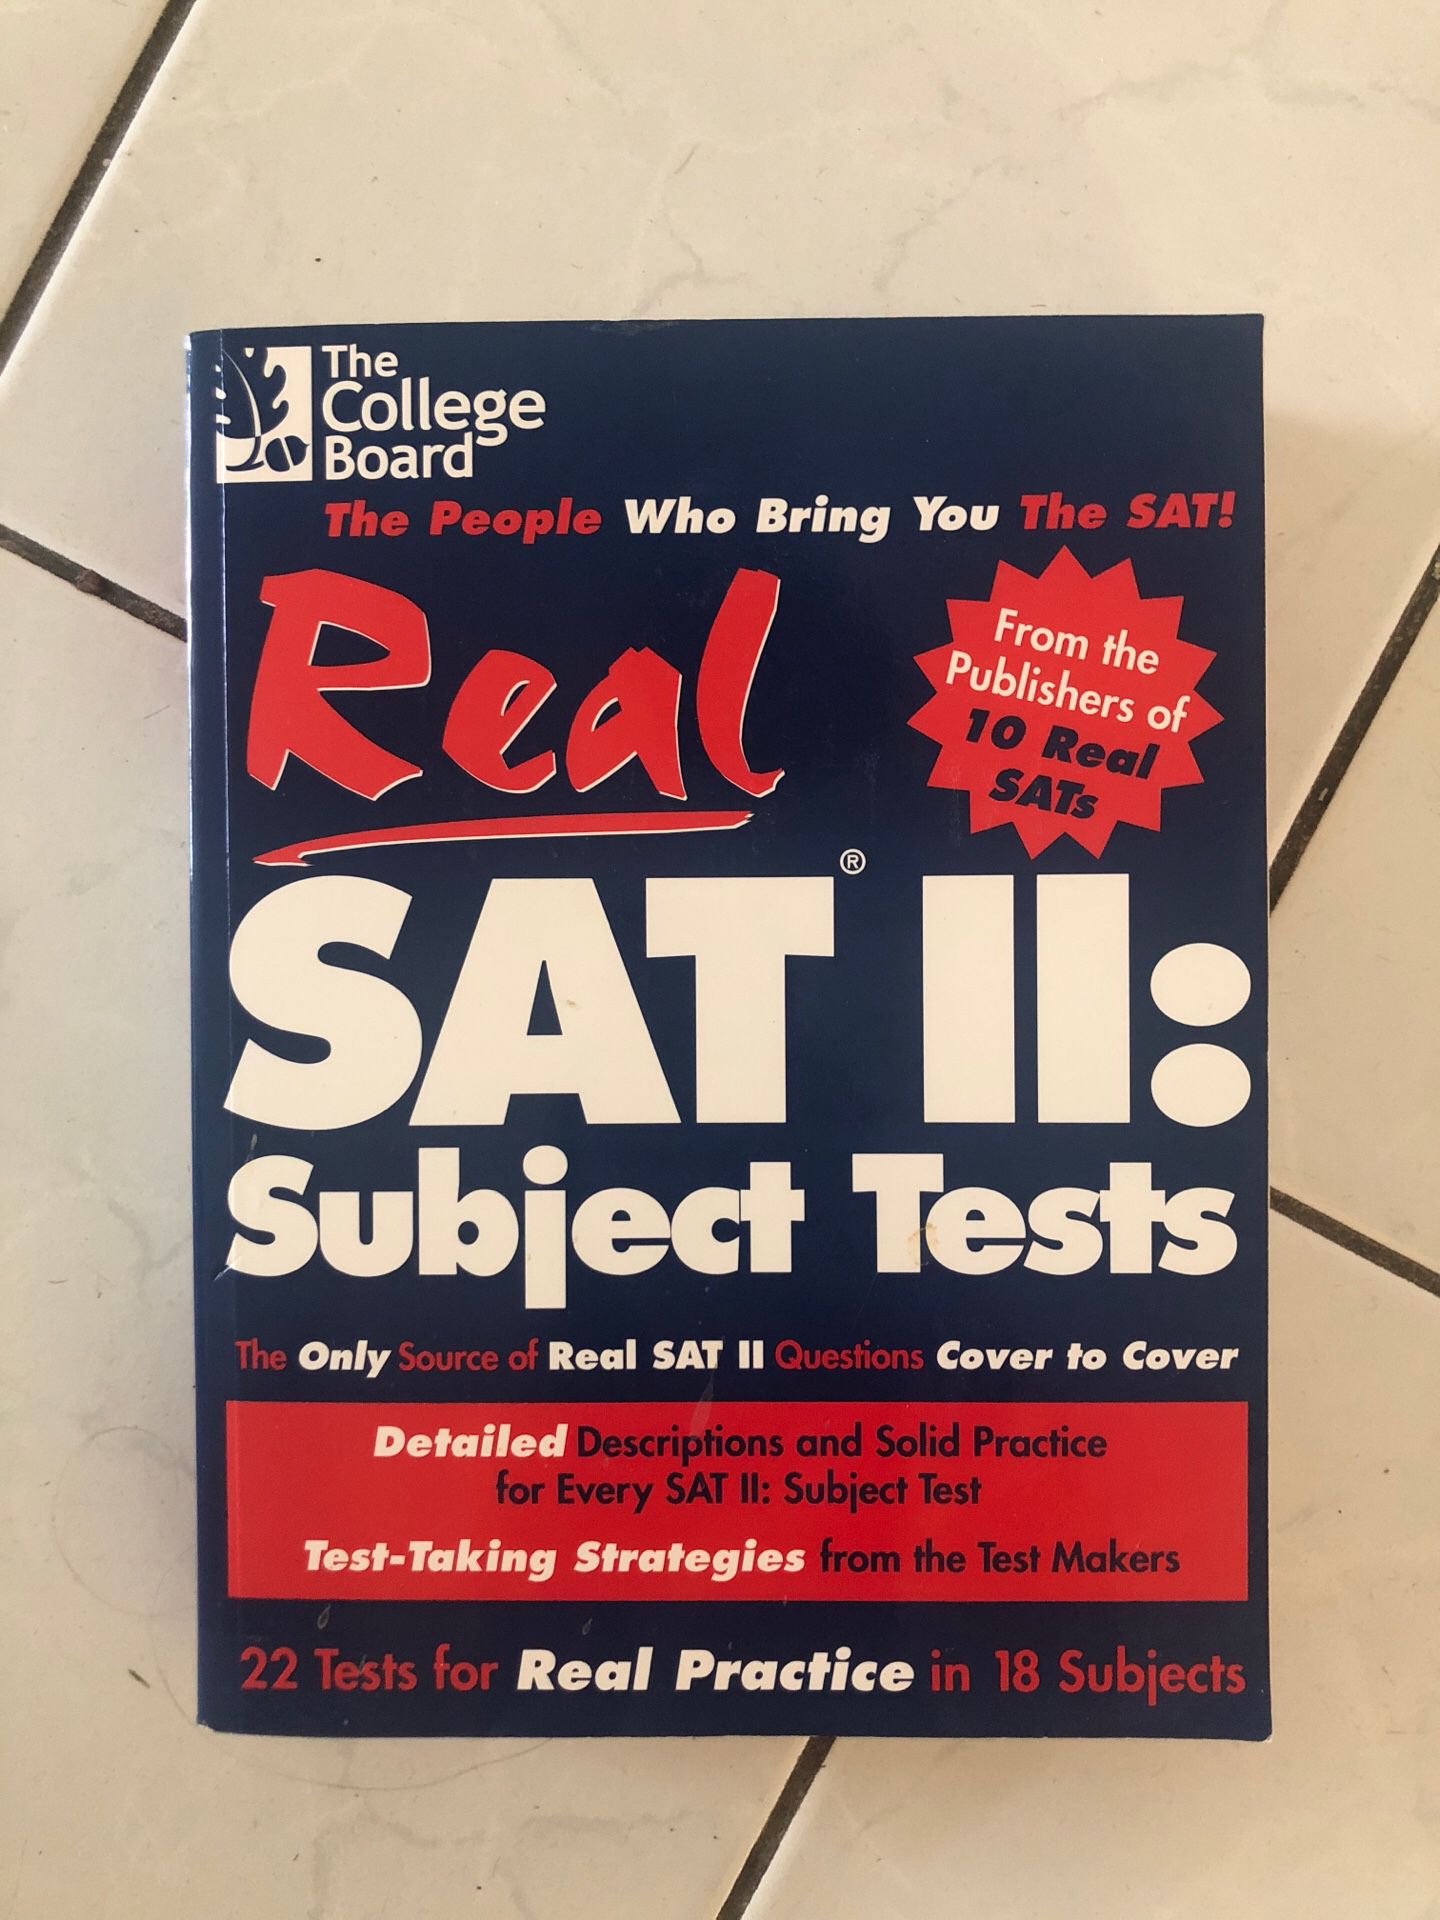 The college board SAT subject tests